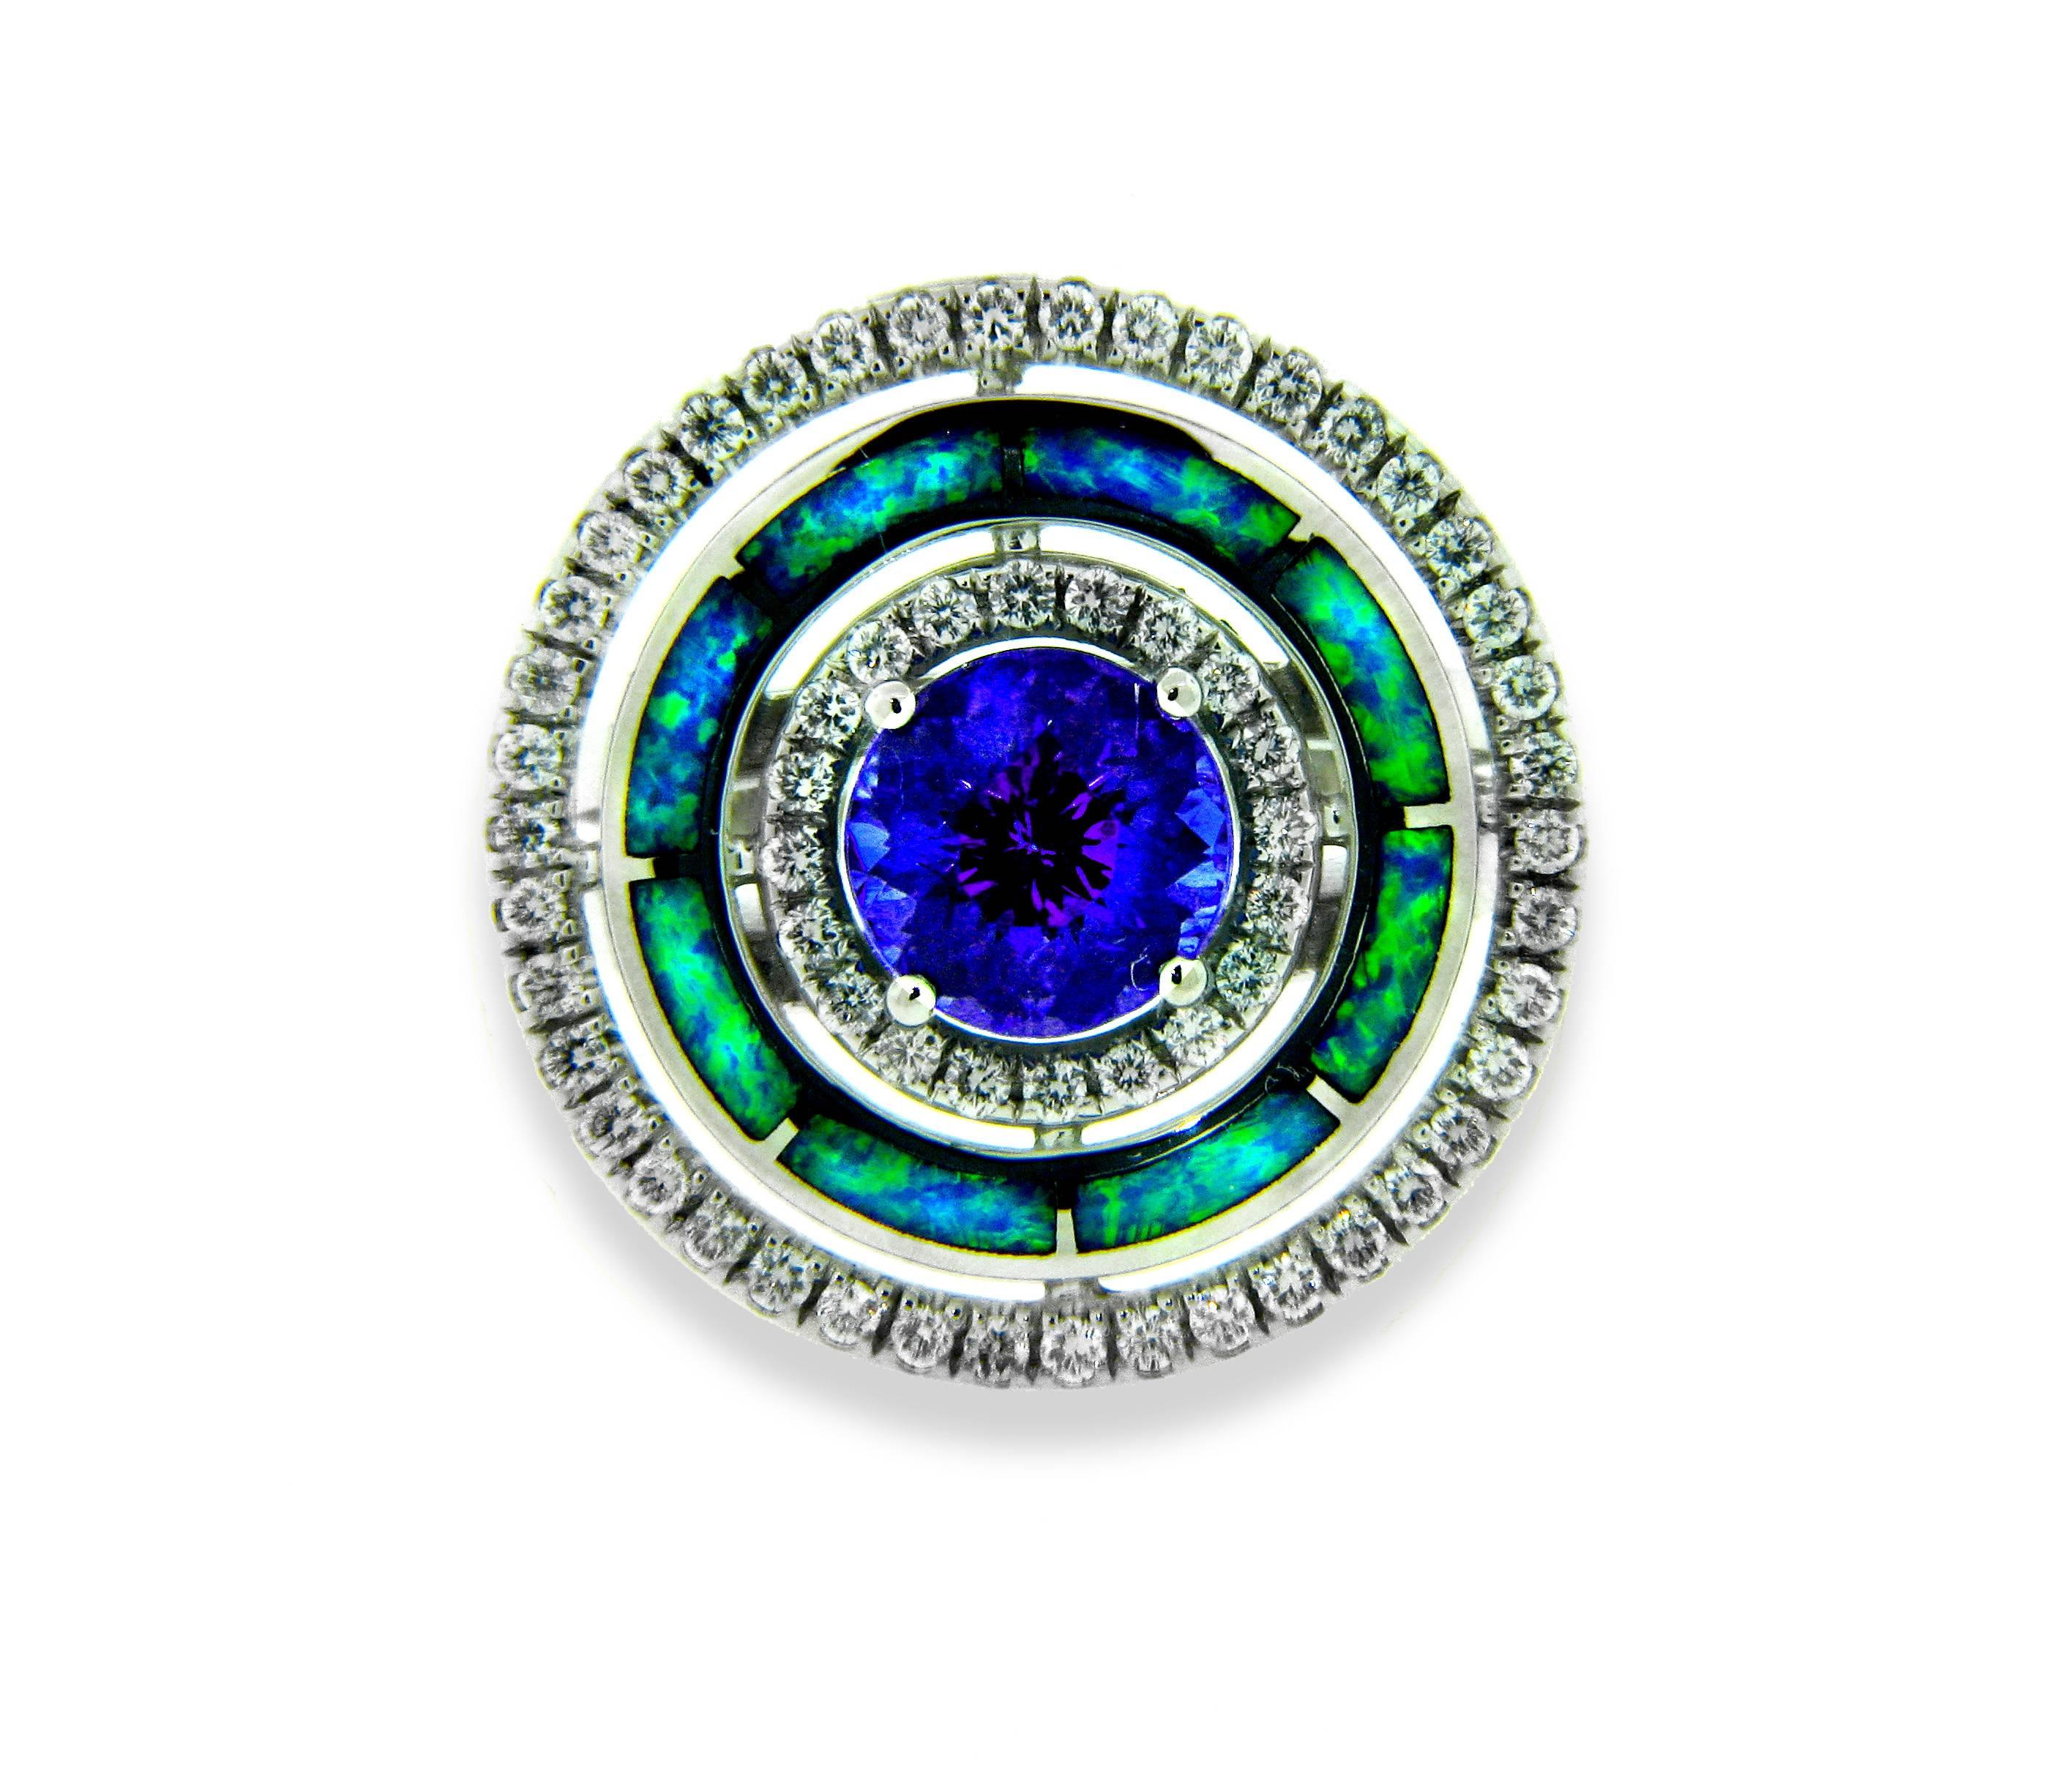 This 18kt white gold 3 tier hand-made, one-of-a-kind ring is designed by Santa Fe based artist, Danuta. It features a brilliant 2.4ct Tanzanite center gem of a deep royal blue-violet which is radiantly faceted to catch the light-and everyone's